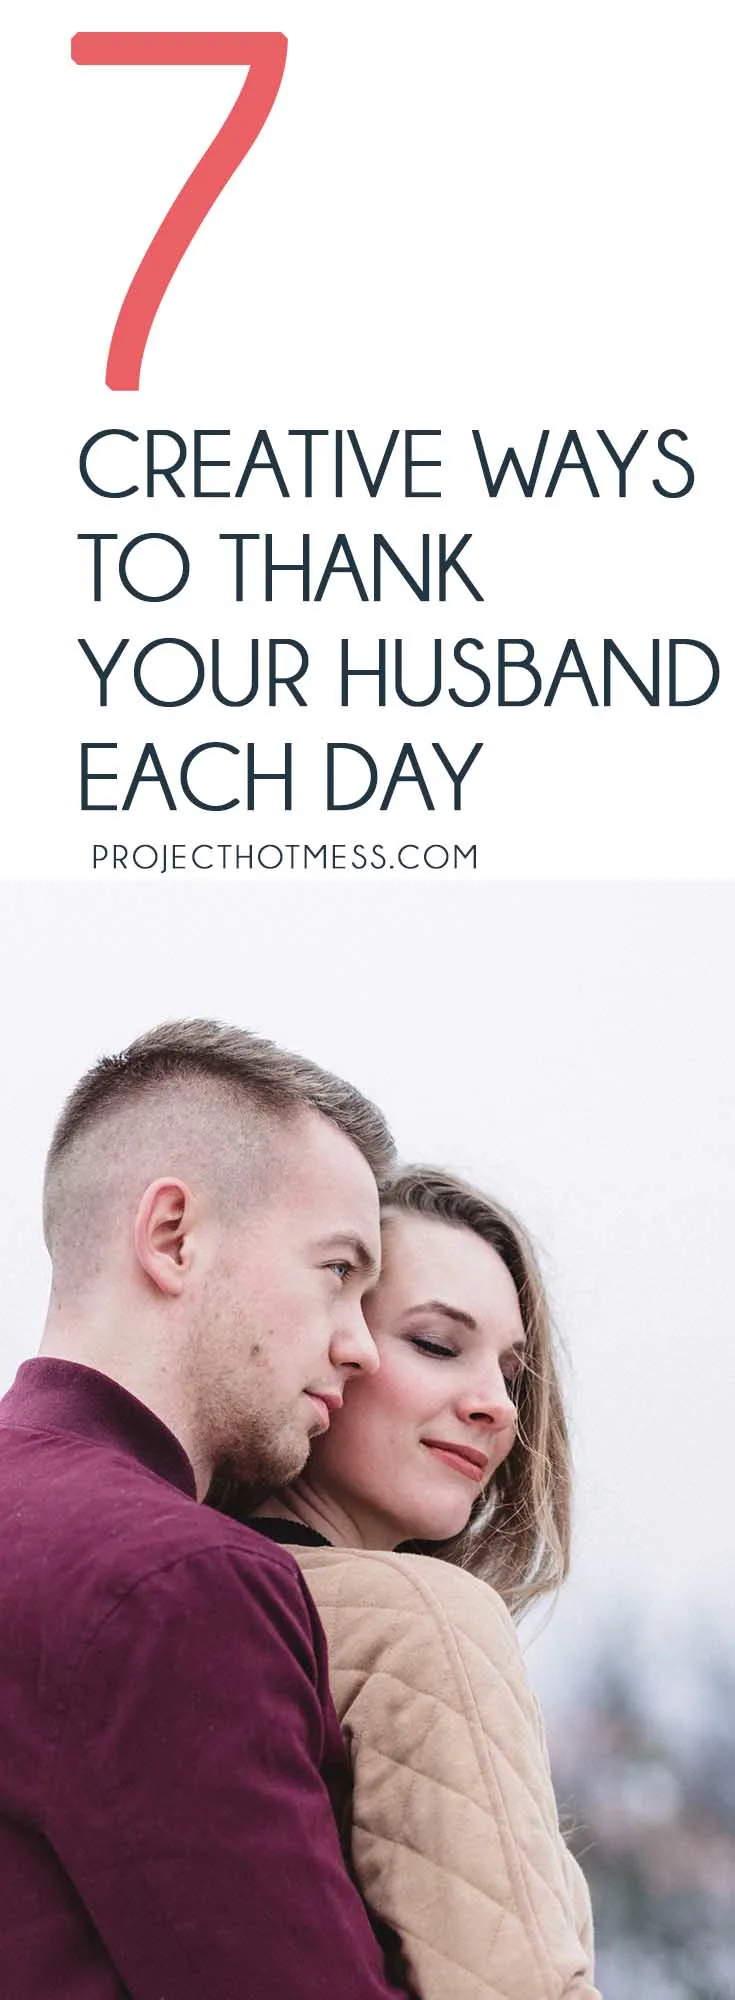 Add a little creativity to the ways you thank your husband each day and challenge him to show thanks too. Watch how the gratitude grows in your relationship. #relationships #marriageadvice #marriagetips #relationshiptips #happymarriage Marriage Advice | Relationship Advice | Happy Marriage | Marriage Tips